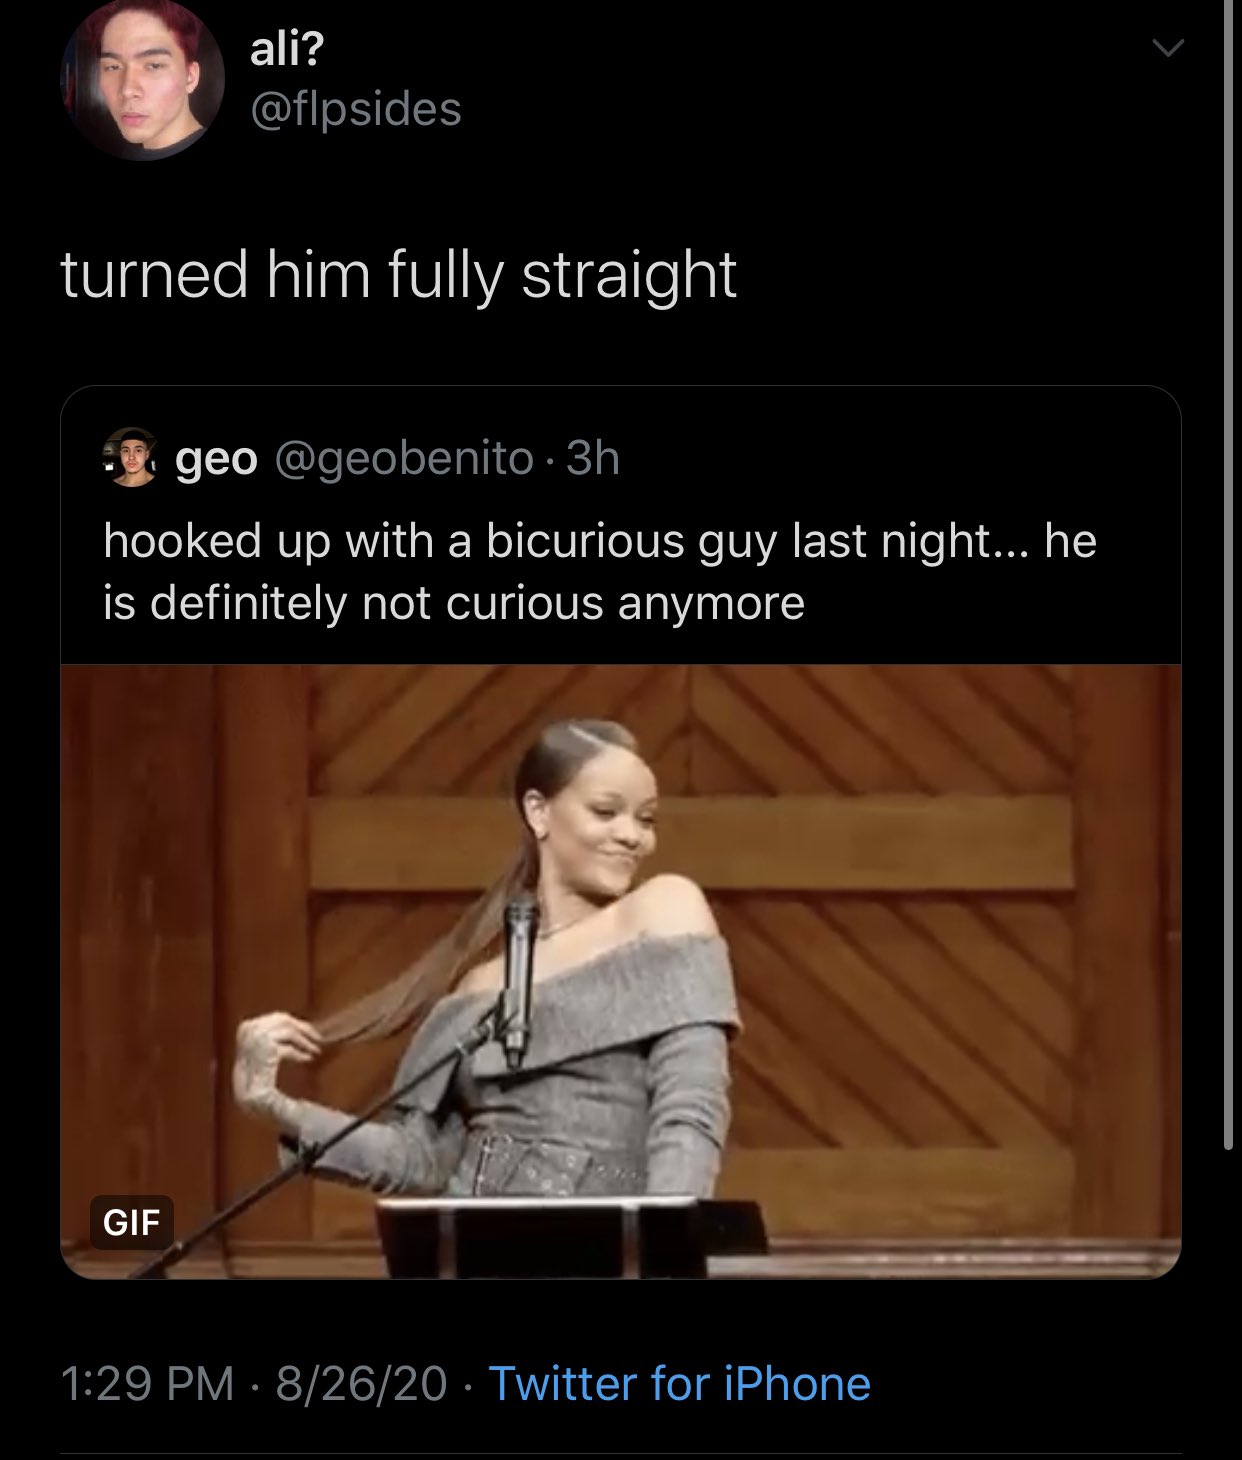 Unhinged Tweets - ali? turned him fully straight geo. 3h hooked up with a bicurious guy last night... he is definitely not curious anymore Gif 82620 Twitter for iPhone